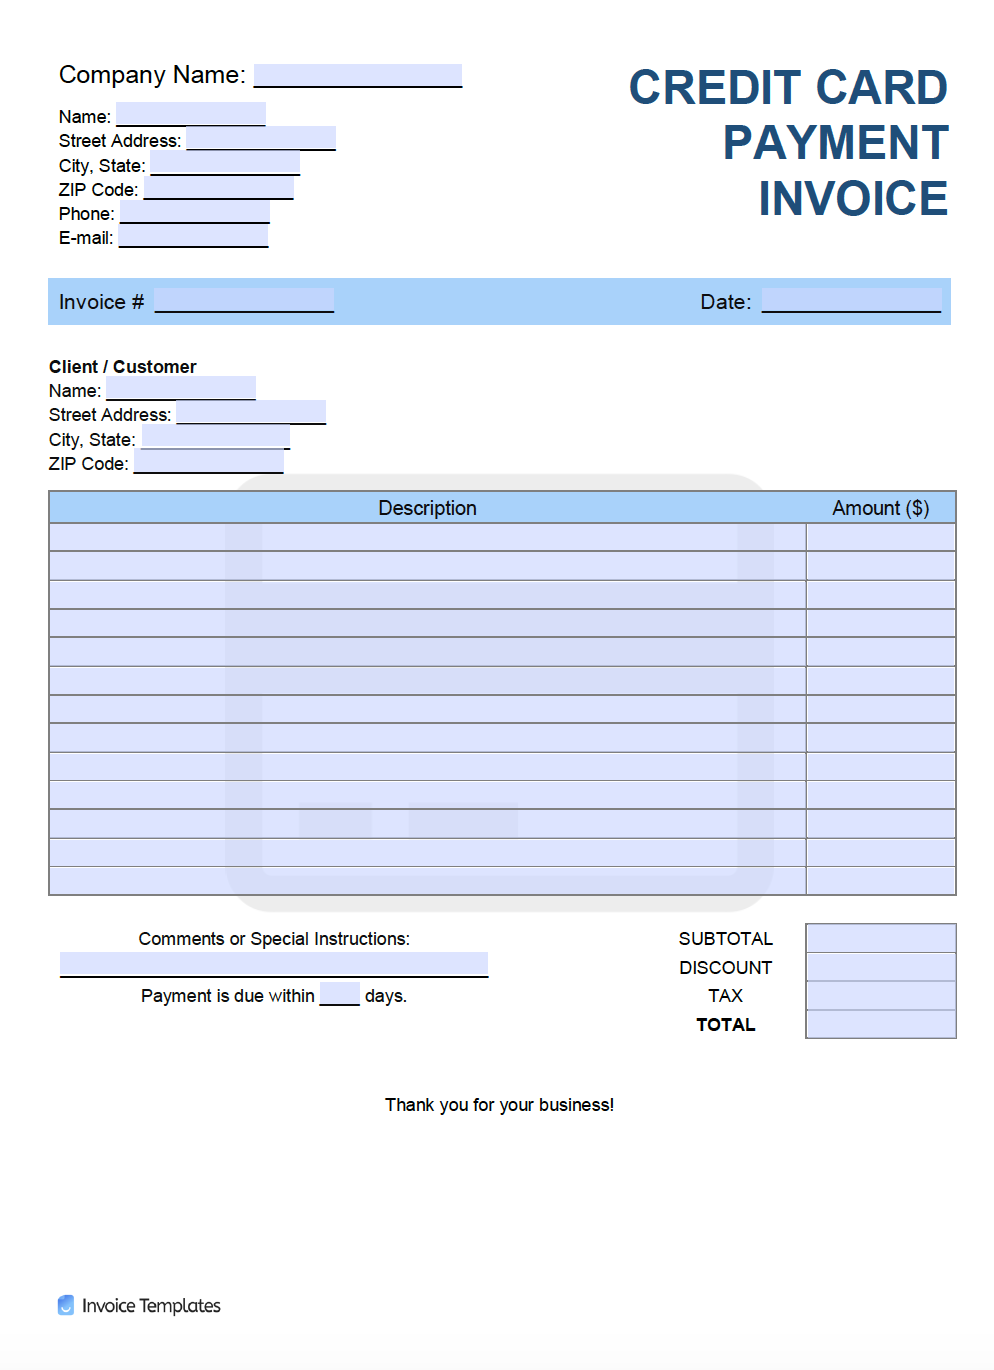 Free Credit Card (cc) Payment Invoice Template  PDF  WORD  EXCEL Within Credit Card Receipt Template